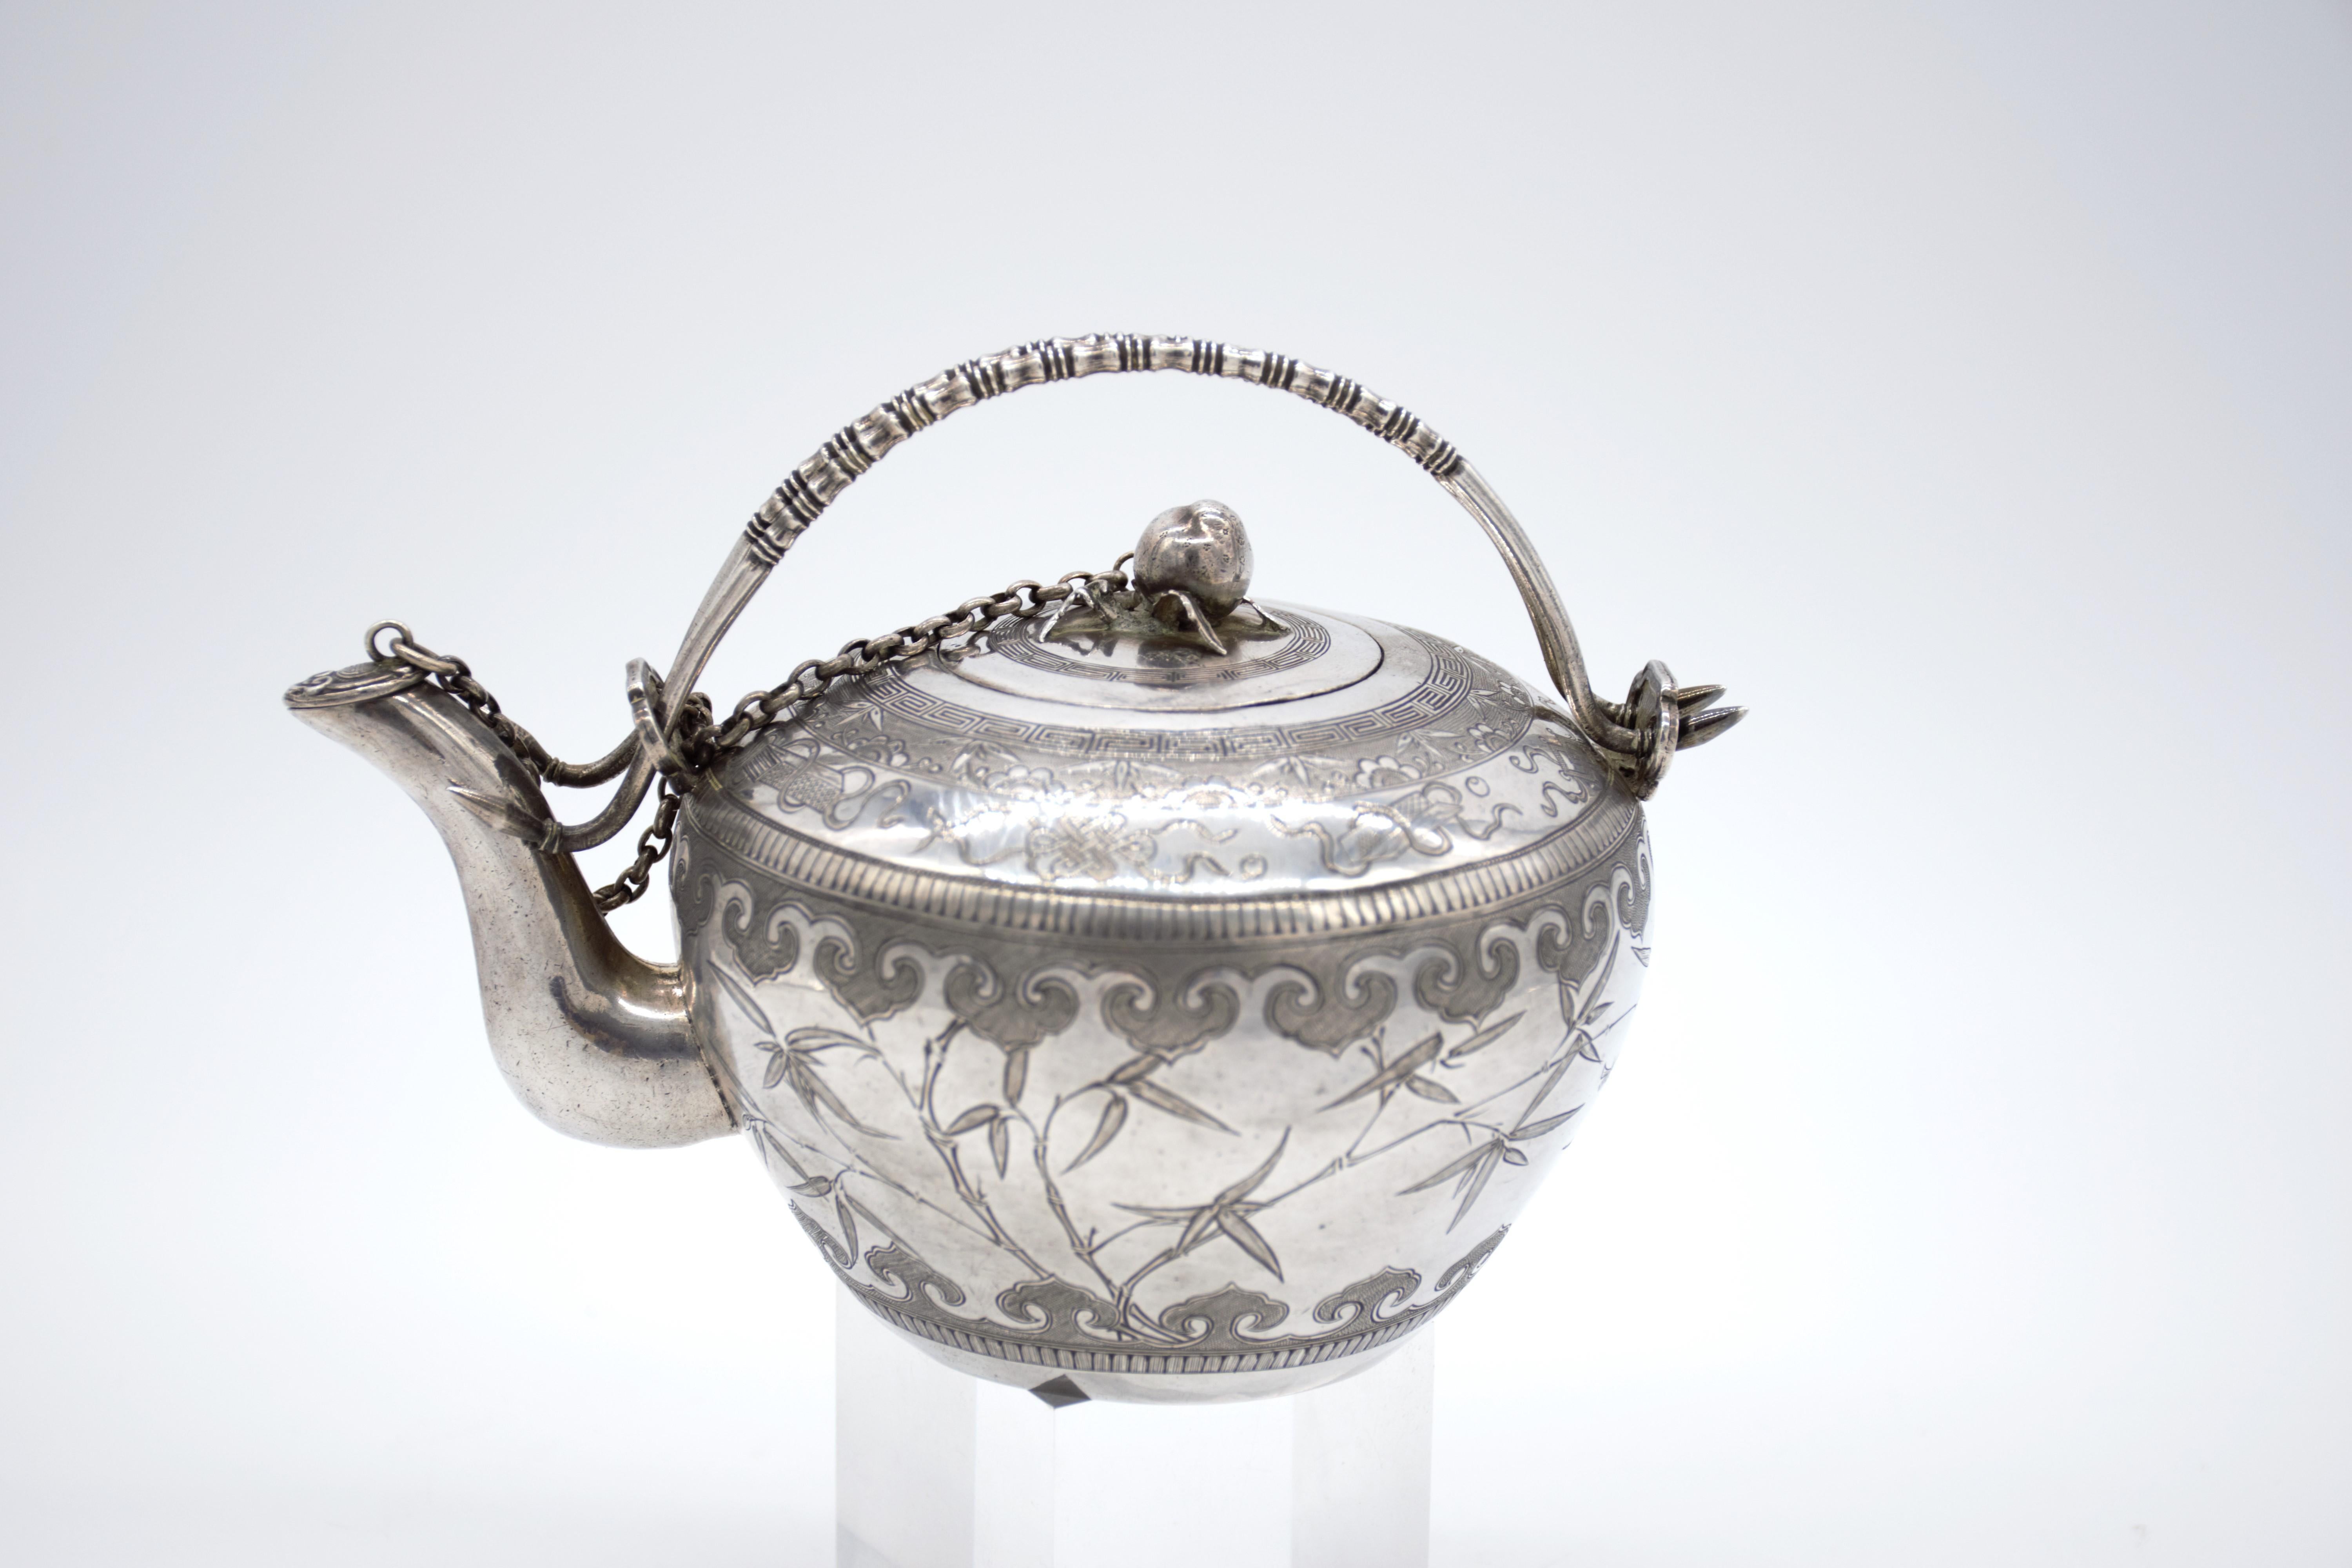 Antique early 20th Century exceptionally rare Chinese solid silver teapot, of traditional round form, the body finely engraved in traditional Chinese style, suggesting this teapot was made for the Chinese market. The body engraved with bamboo and